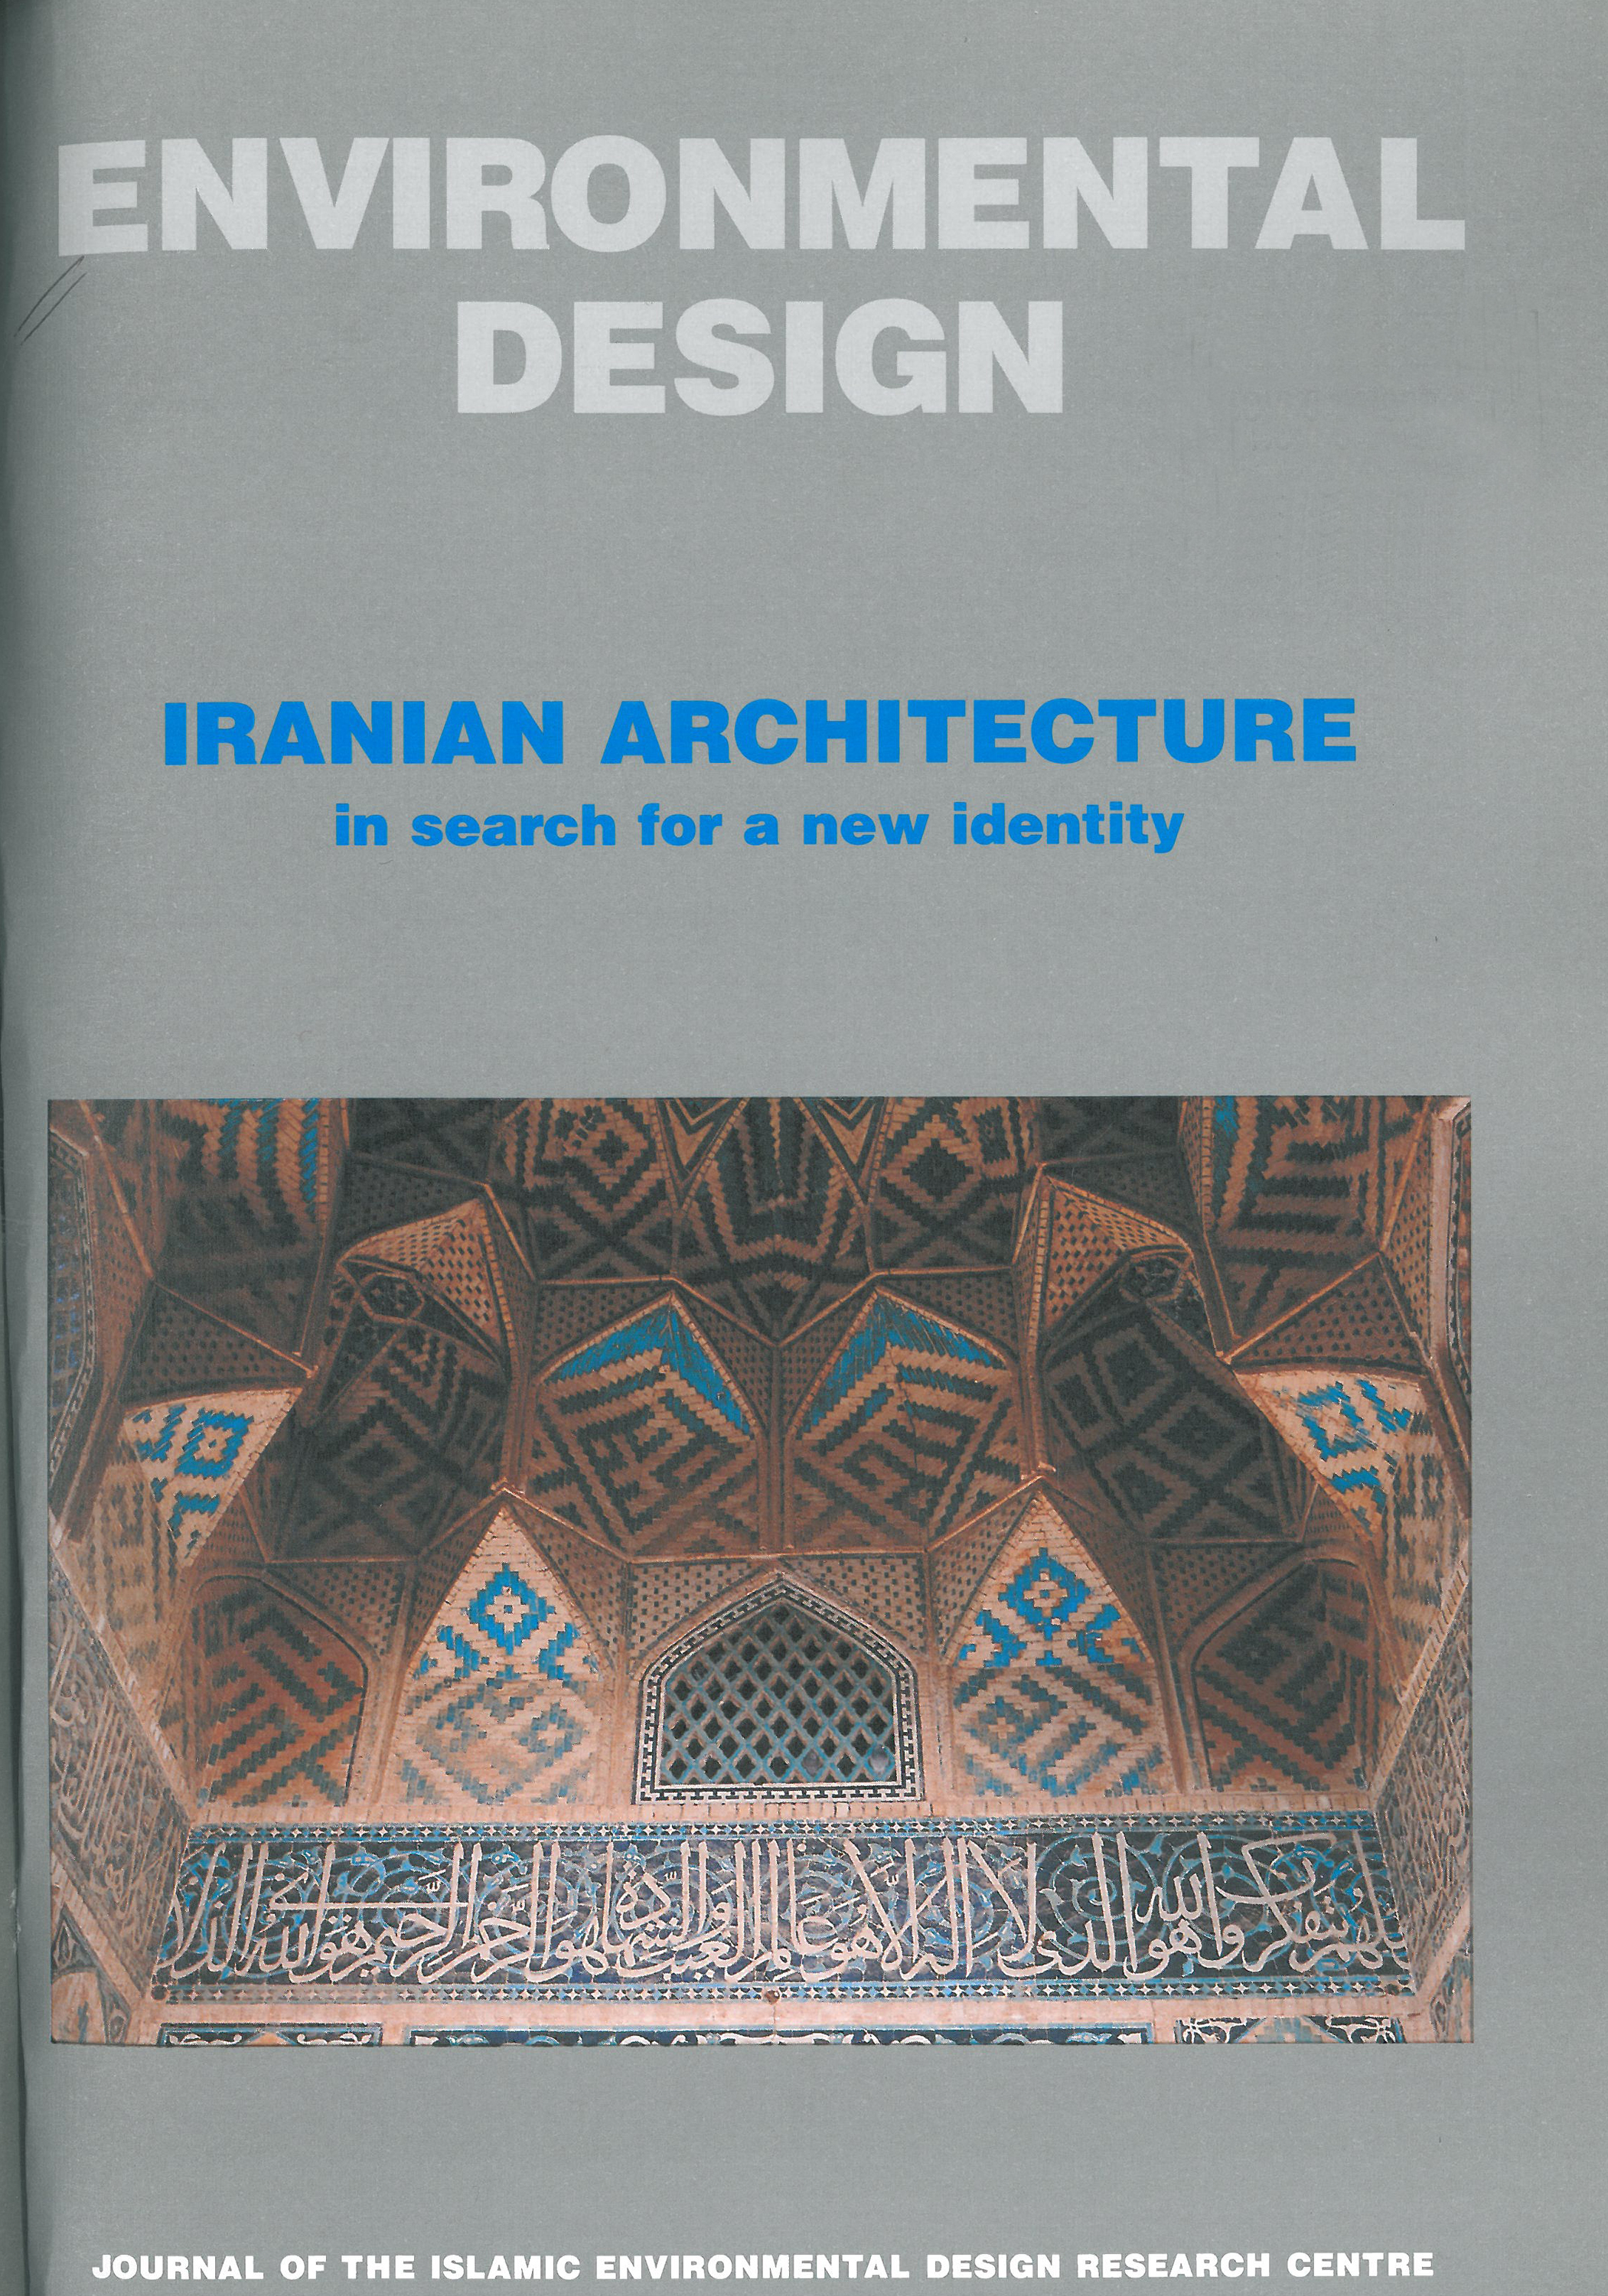 Environmental Design: Iranian Architecture in Search for a New Identity